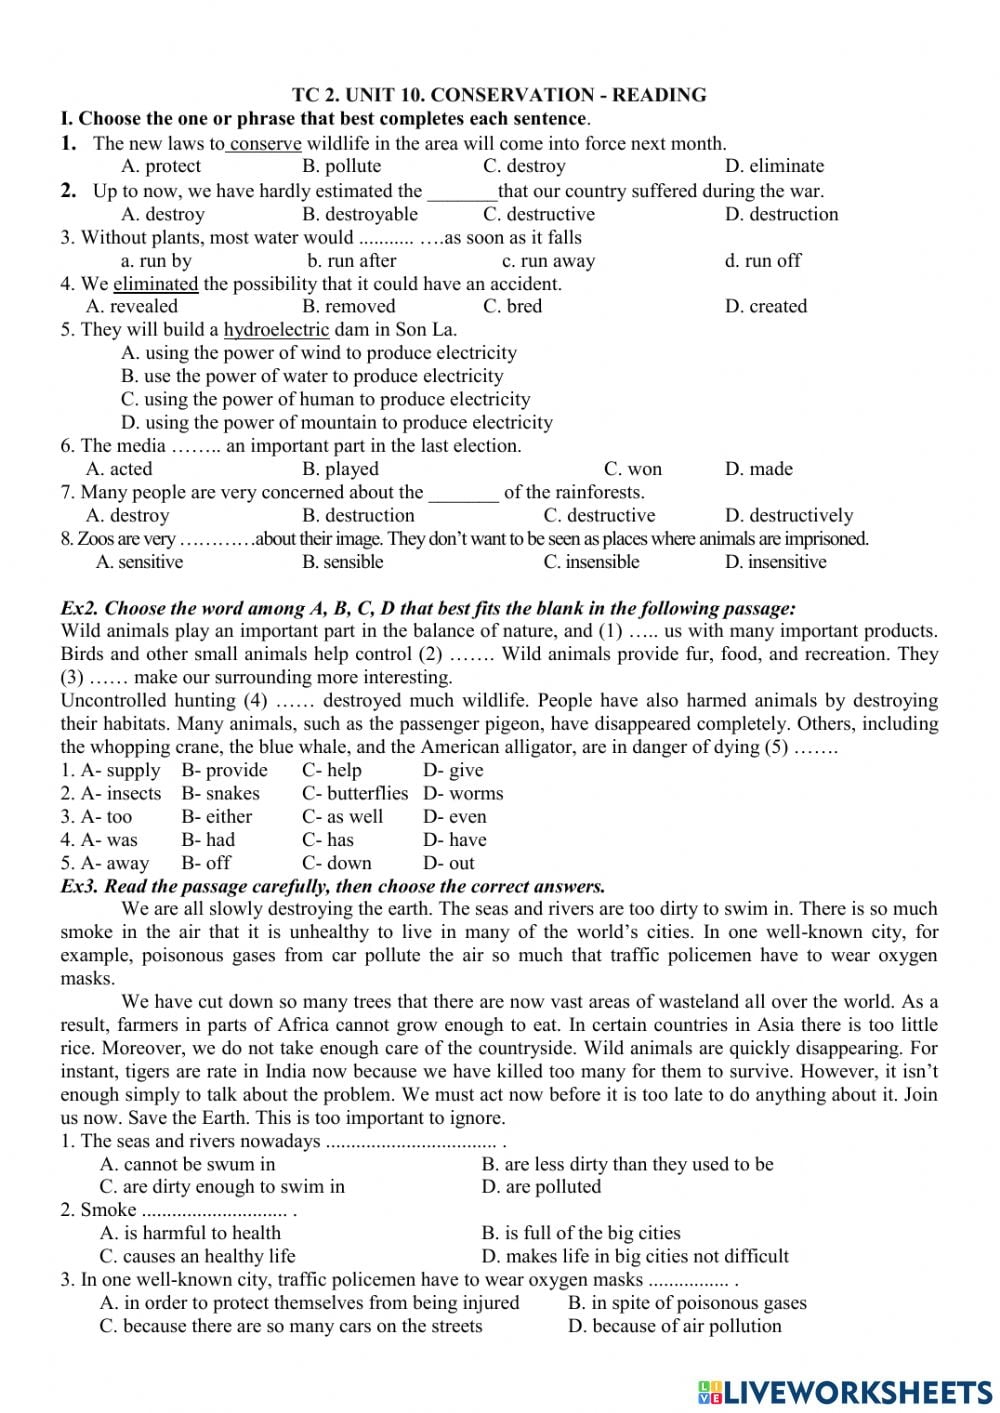 Pollution And Conservation Reading Worksheets Answers